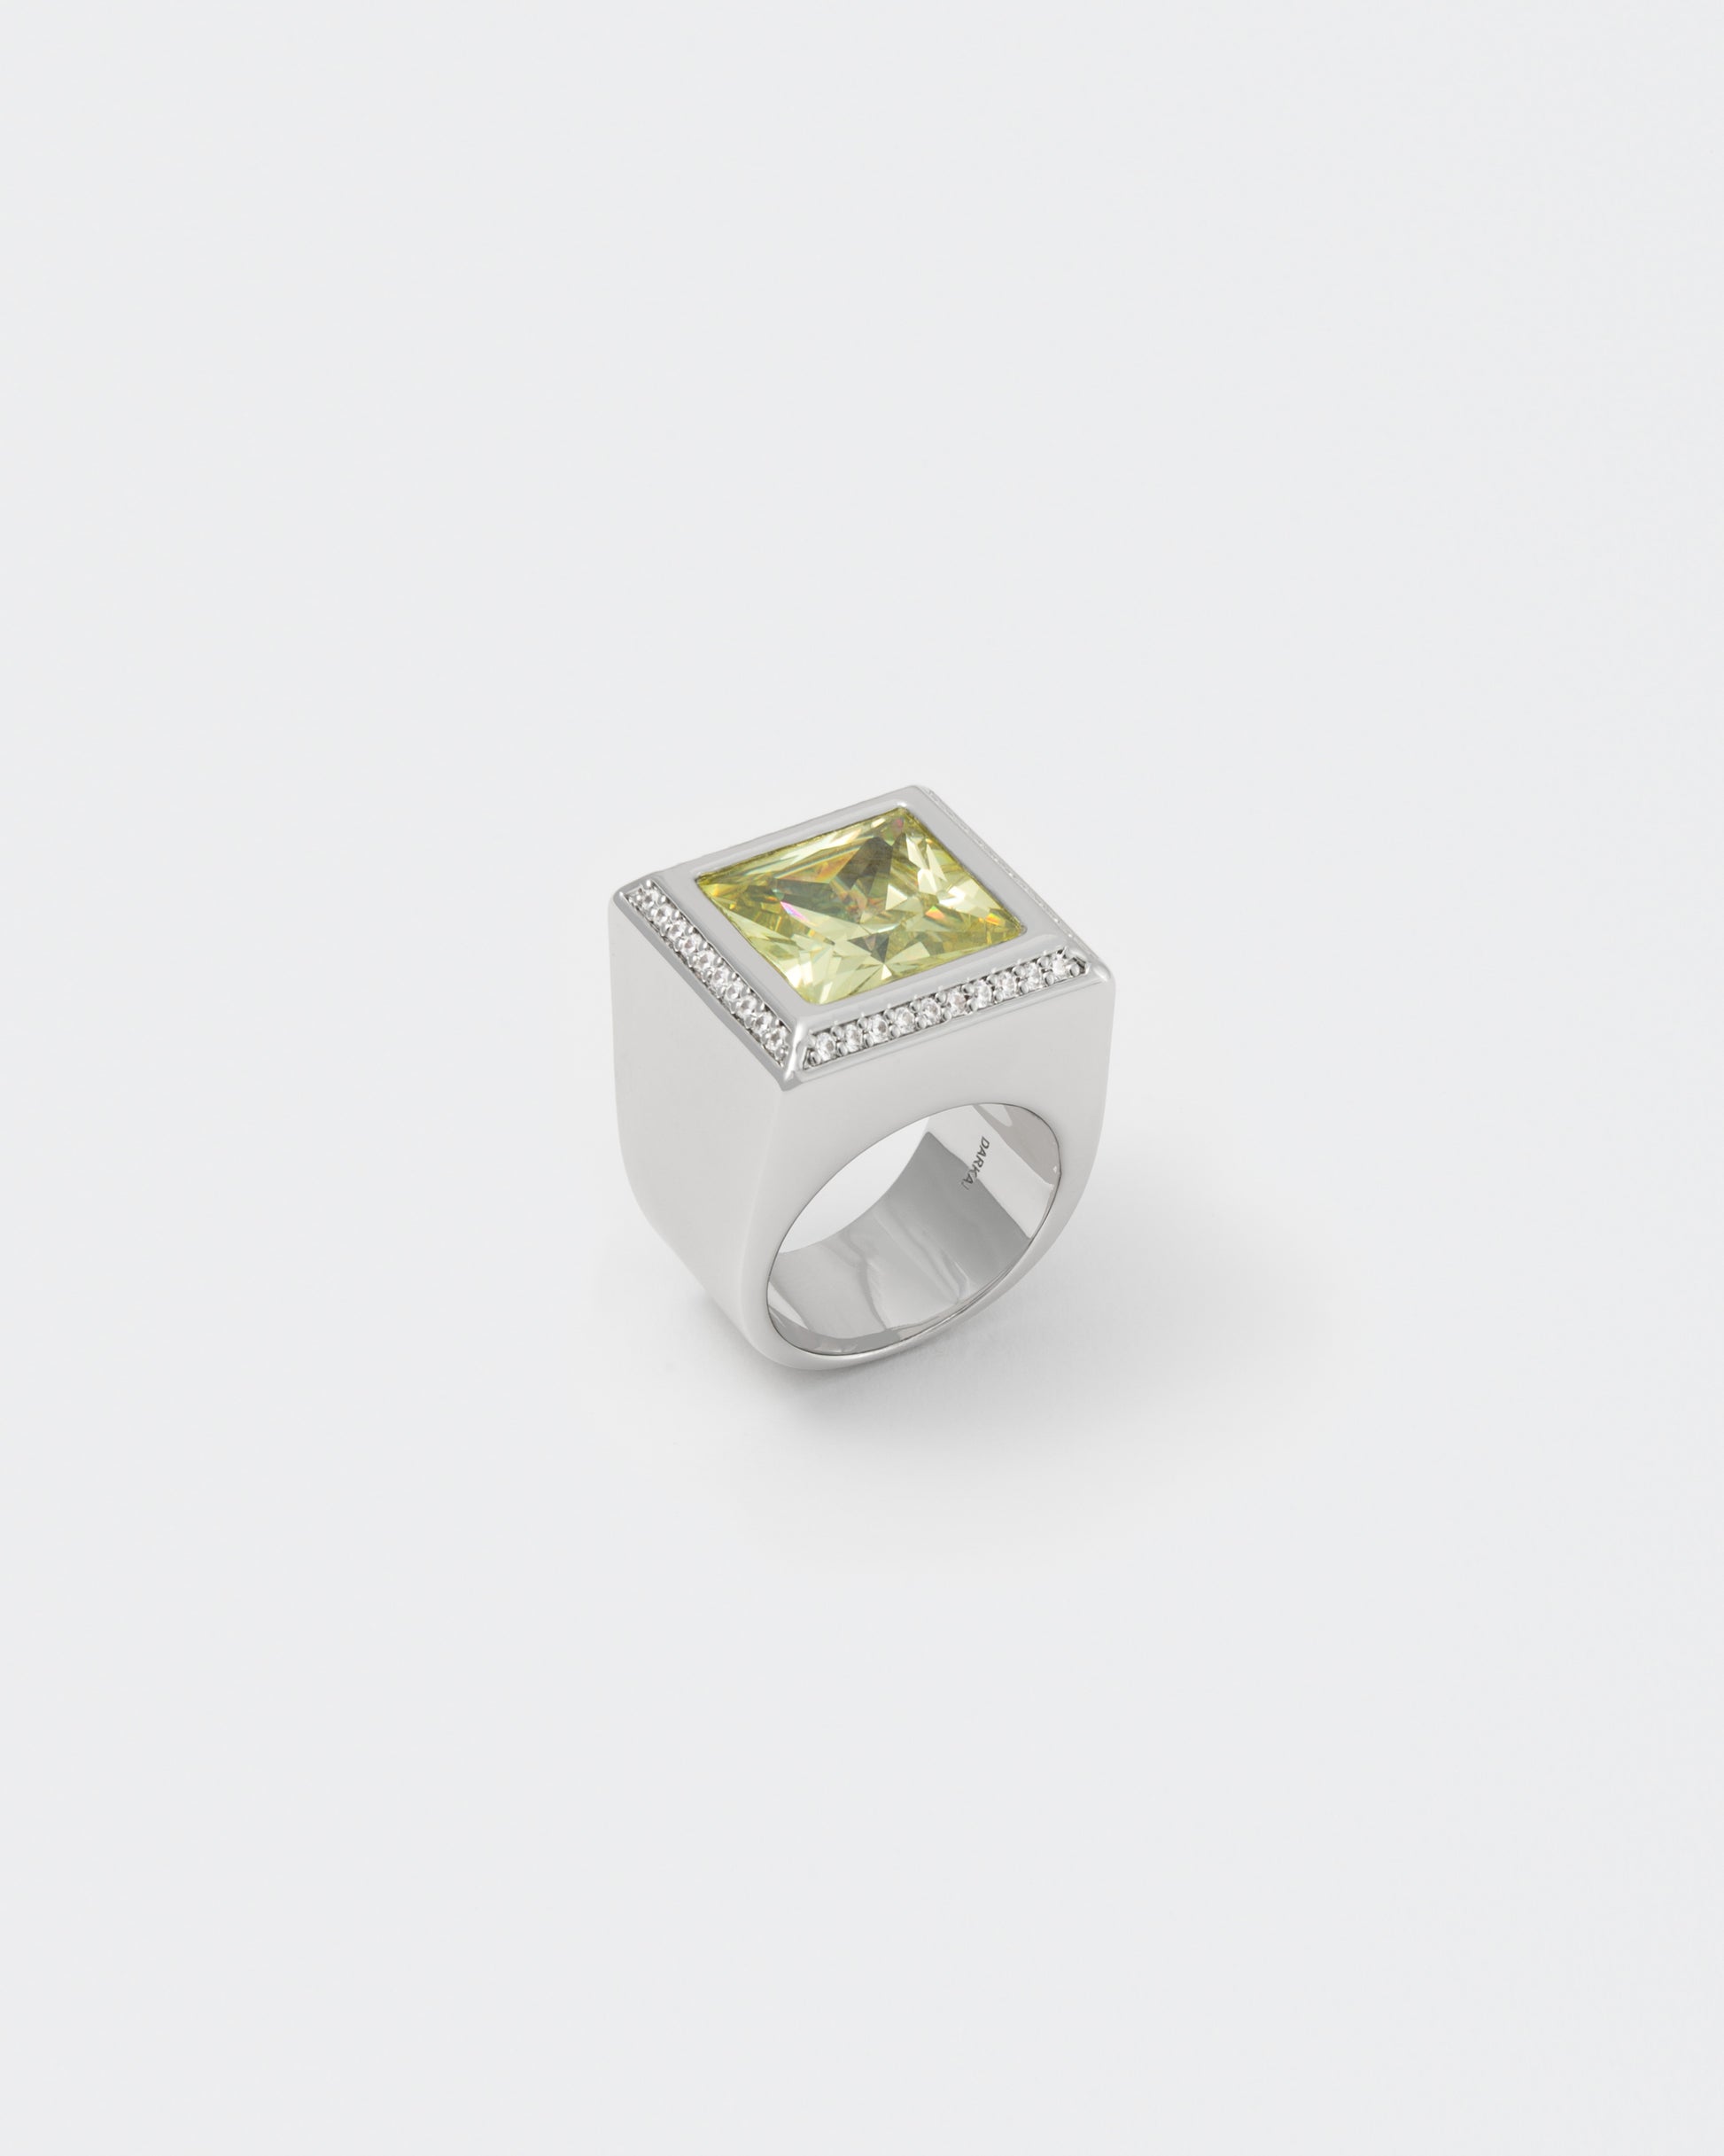 Championship ring with 18kt white gold coating, oversize princess-cut stone in olive with hand-set diamond white zircons on the frame. Highly polished structure and logo engraved